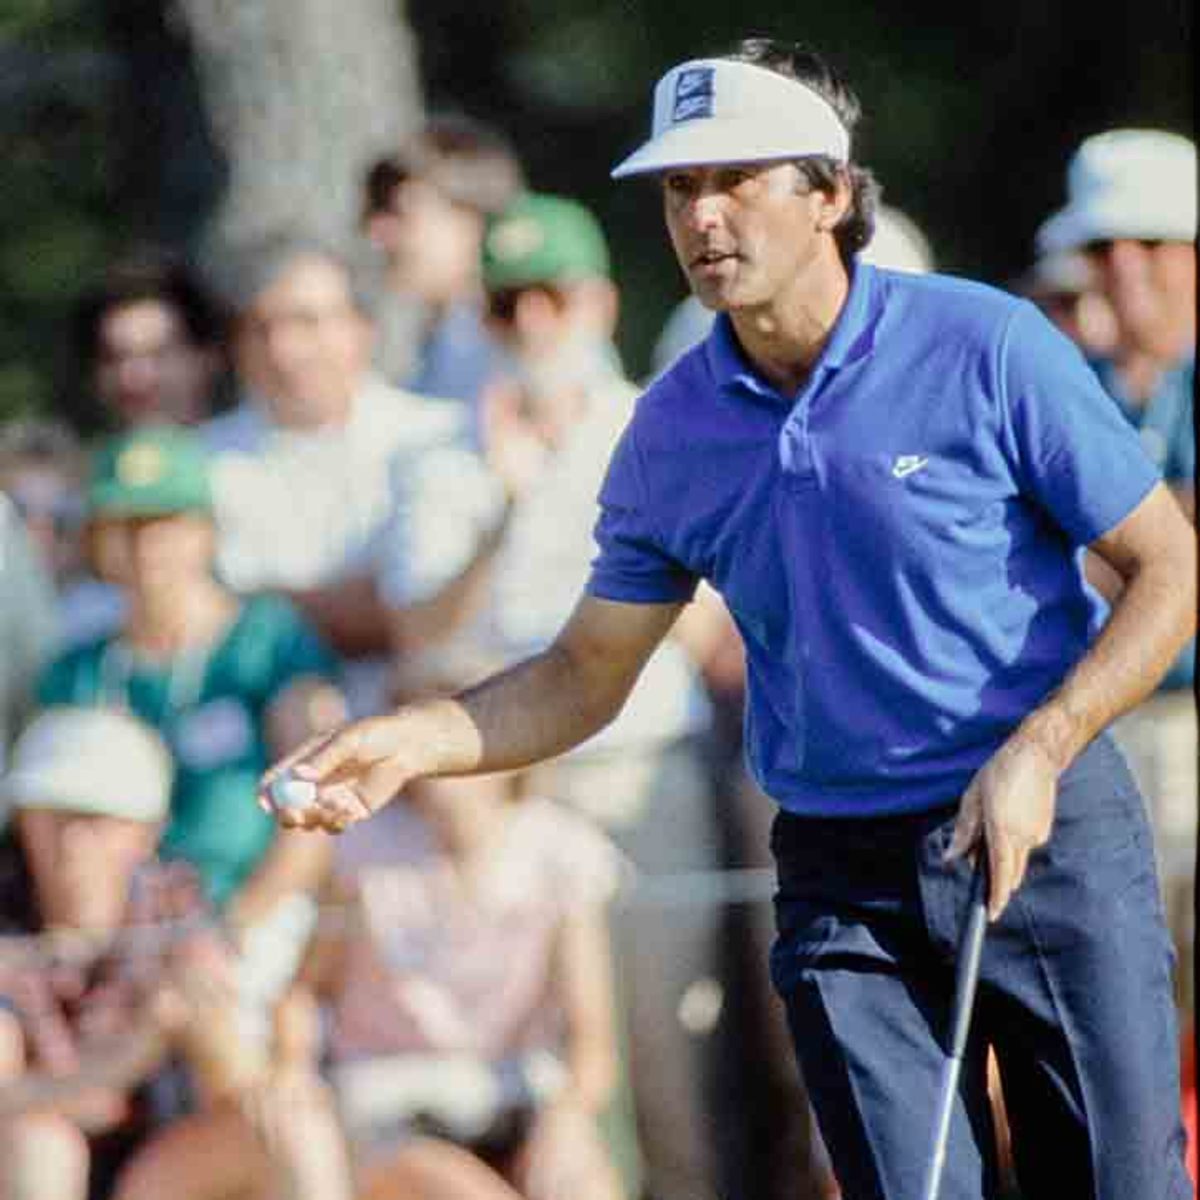 Seve Ballesteros is pictured at the 1986 Masters